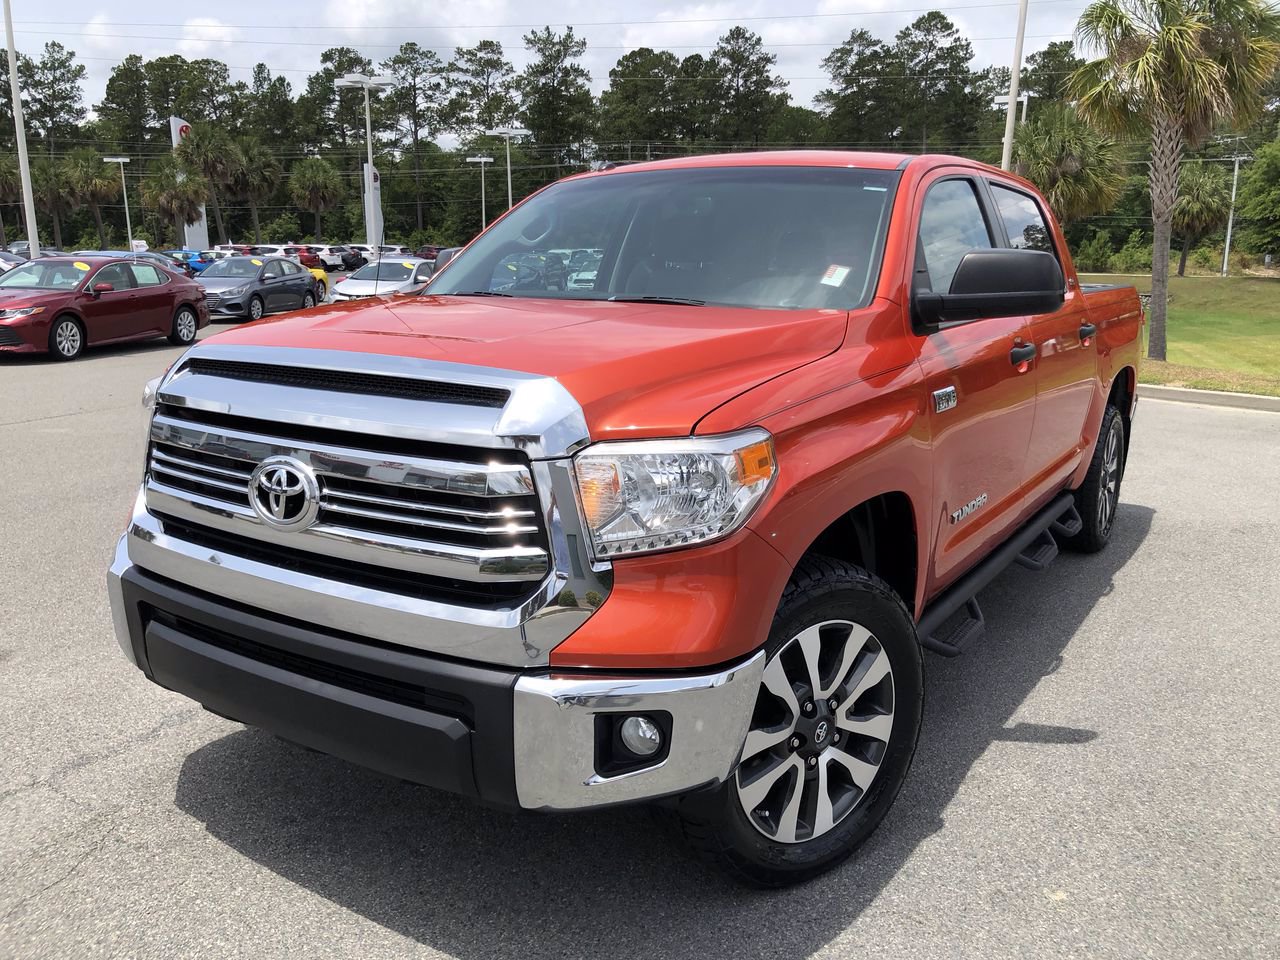 Certified Pre-Owned 2017 Toyota Tundra 4WD SR5 Crewmax Crew Cab Pickup